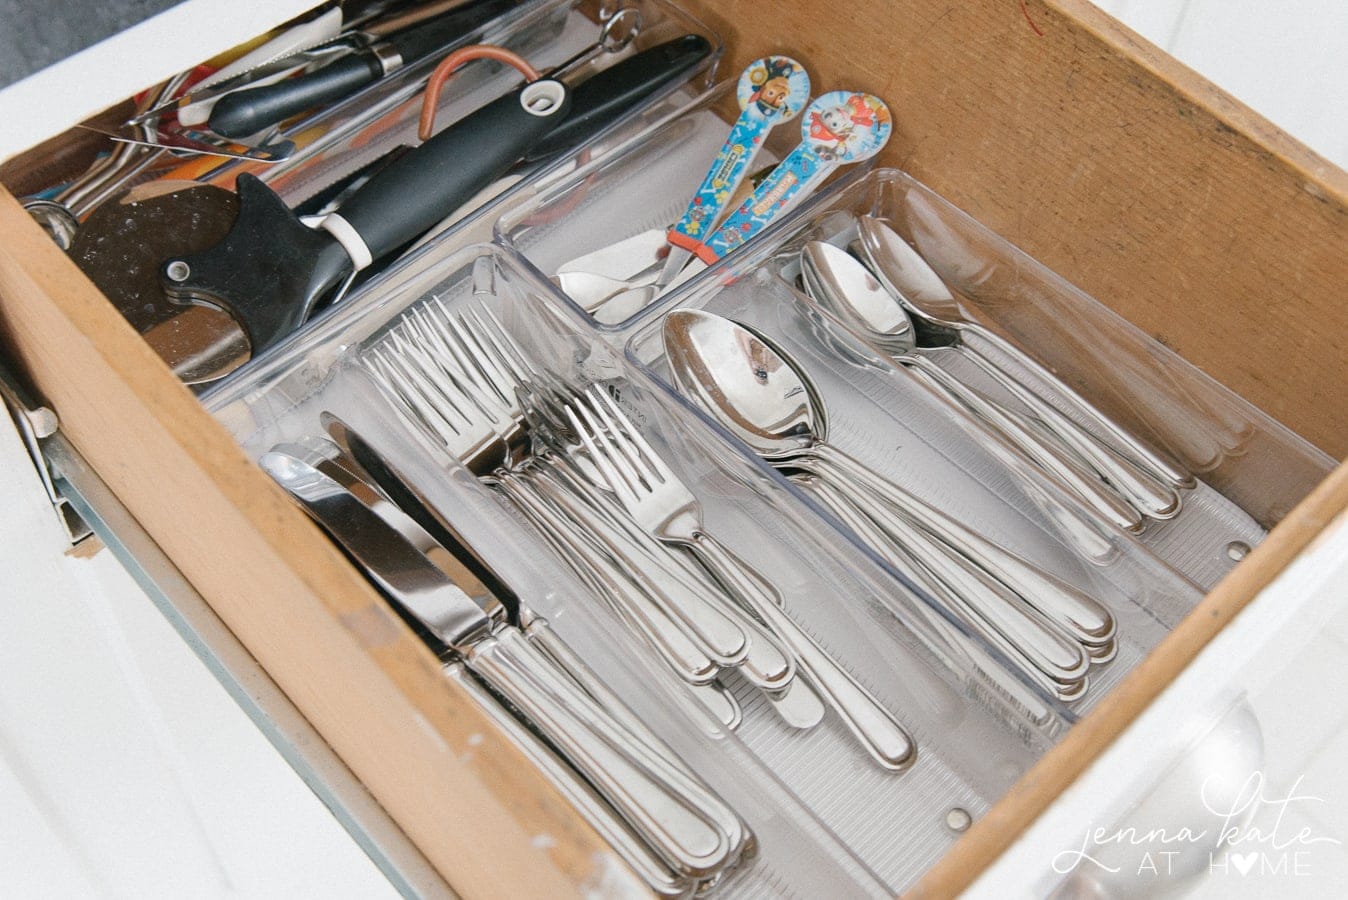 Kitchen drawer and cabinet organization tips